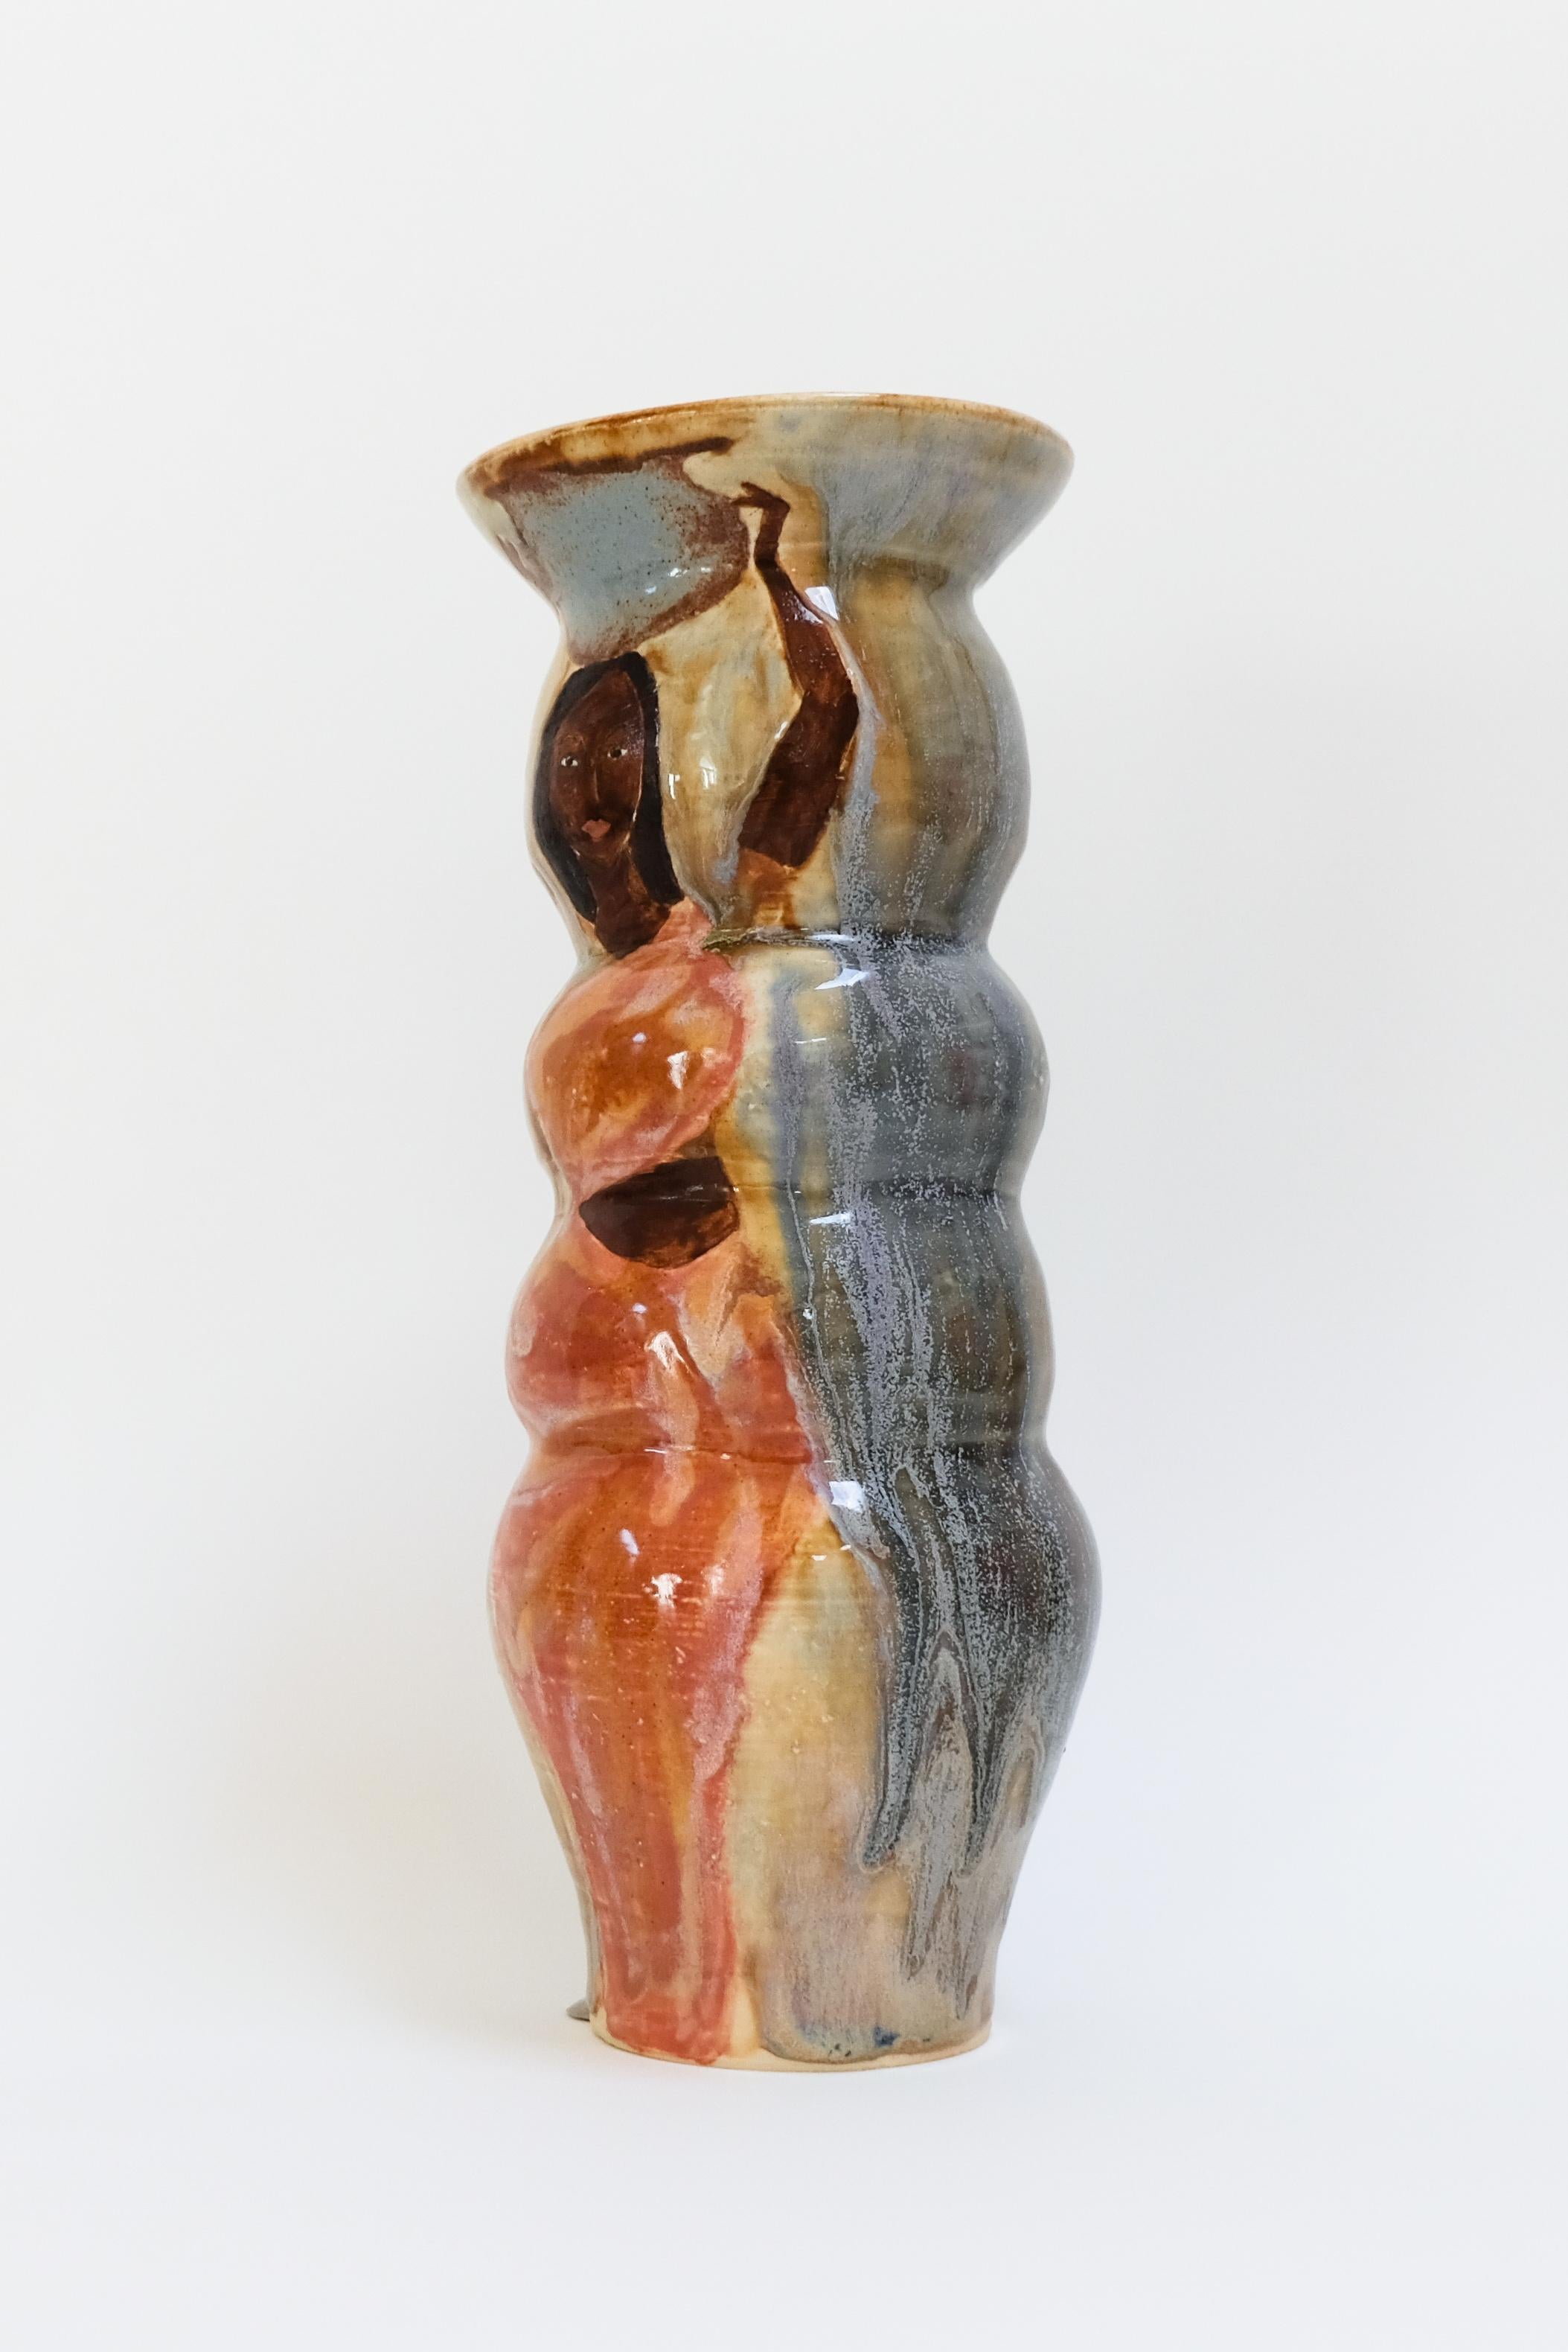 This warm contemporary figurative ceramic vase is an original artwork by Canadian artist Misbah Ahmed. This piece from her collection of Mur vessels explores organic feminine forms with clay. Mur - meaning curve - uses a combination of wheel